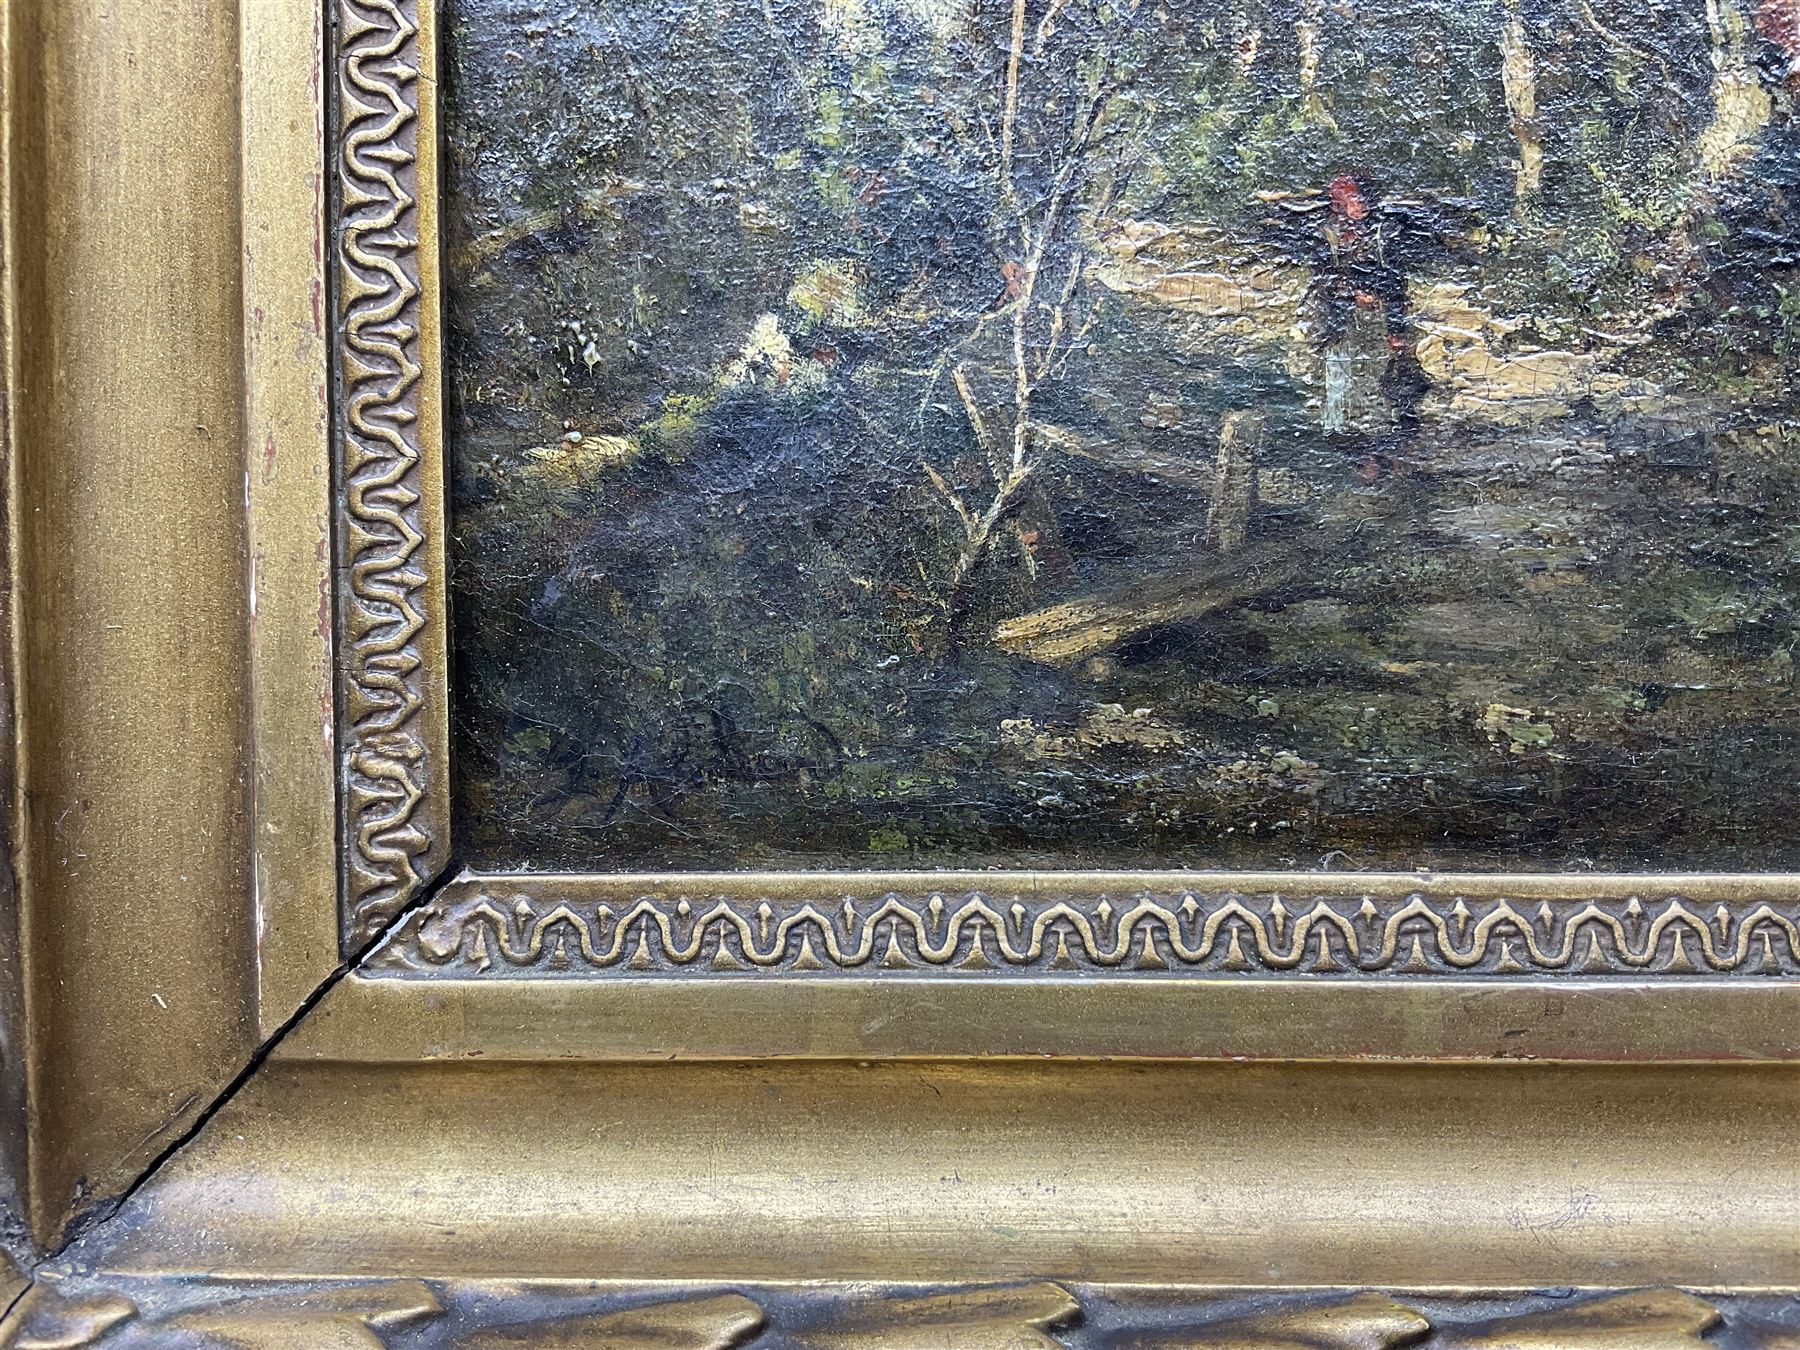 English School (19th century): Gathering Firewood in a Silver Birch Forest - Image 3 of 3